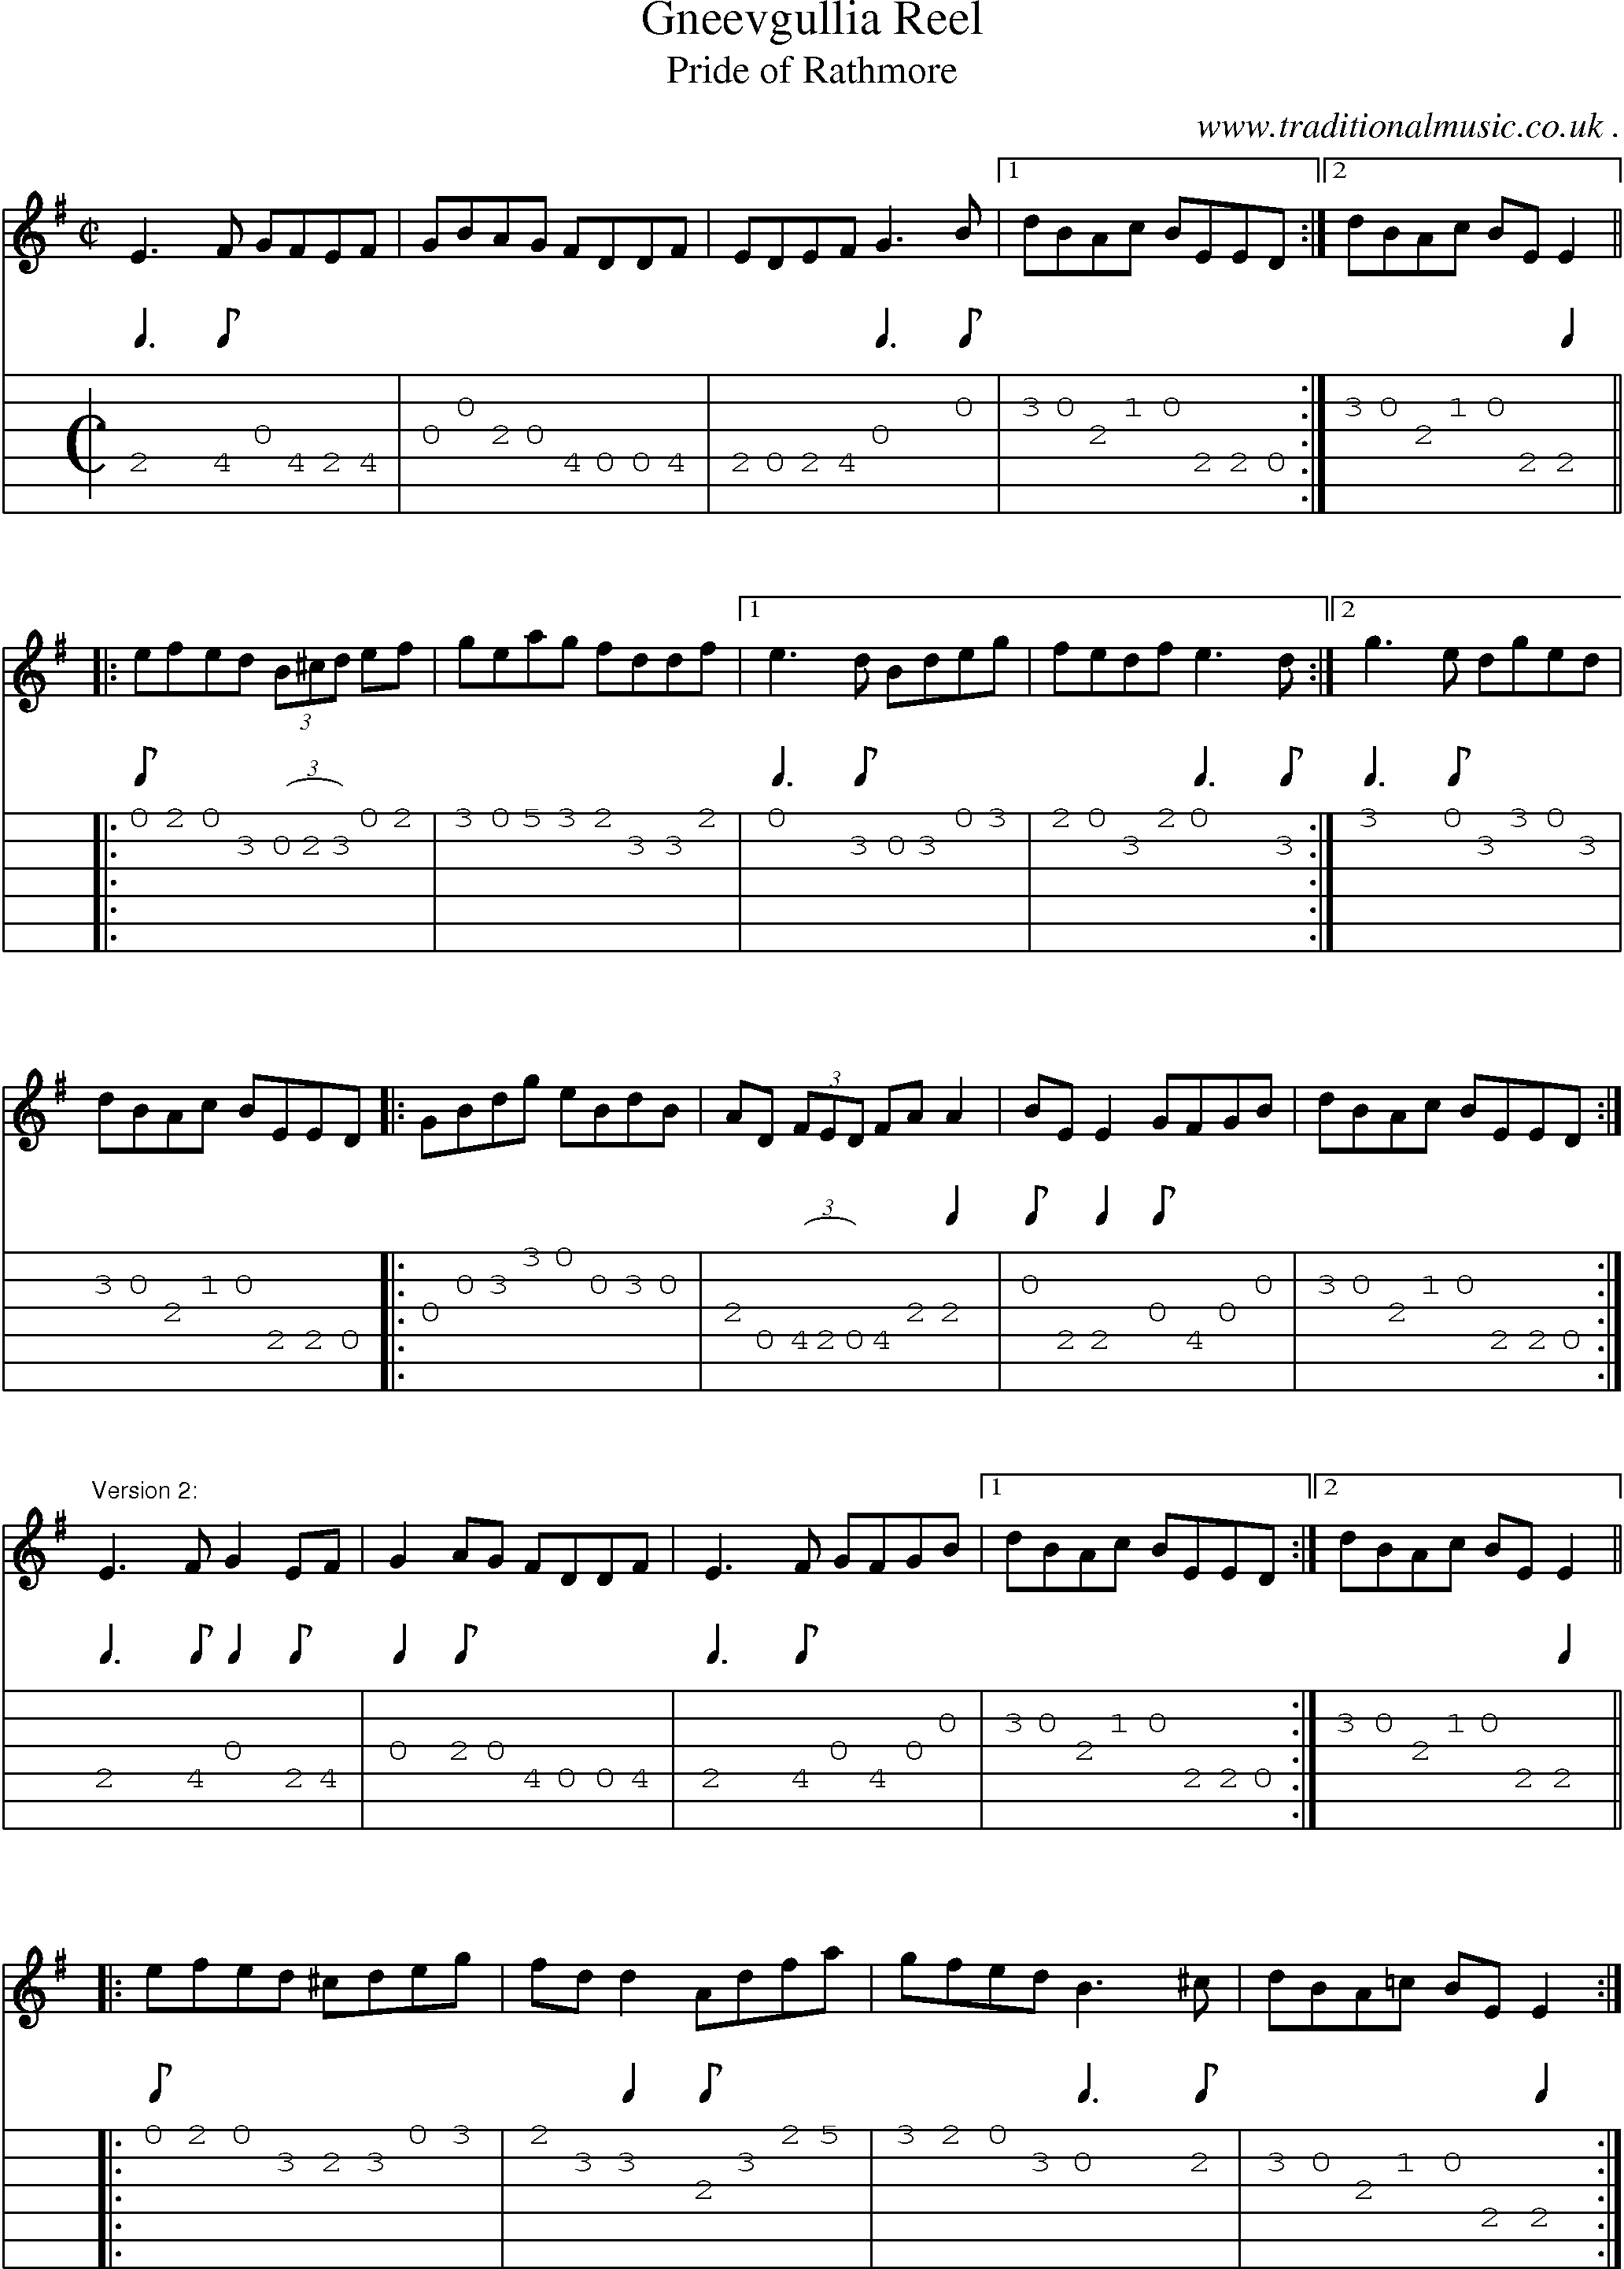 Sheet-Music and Guitar Tabs for Gneevgullia Reel